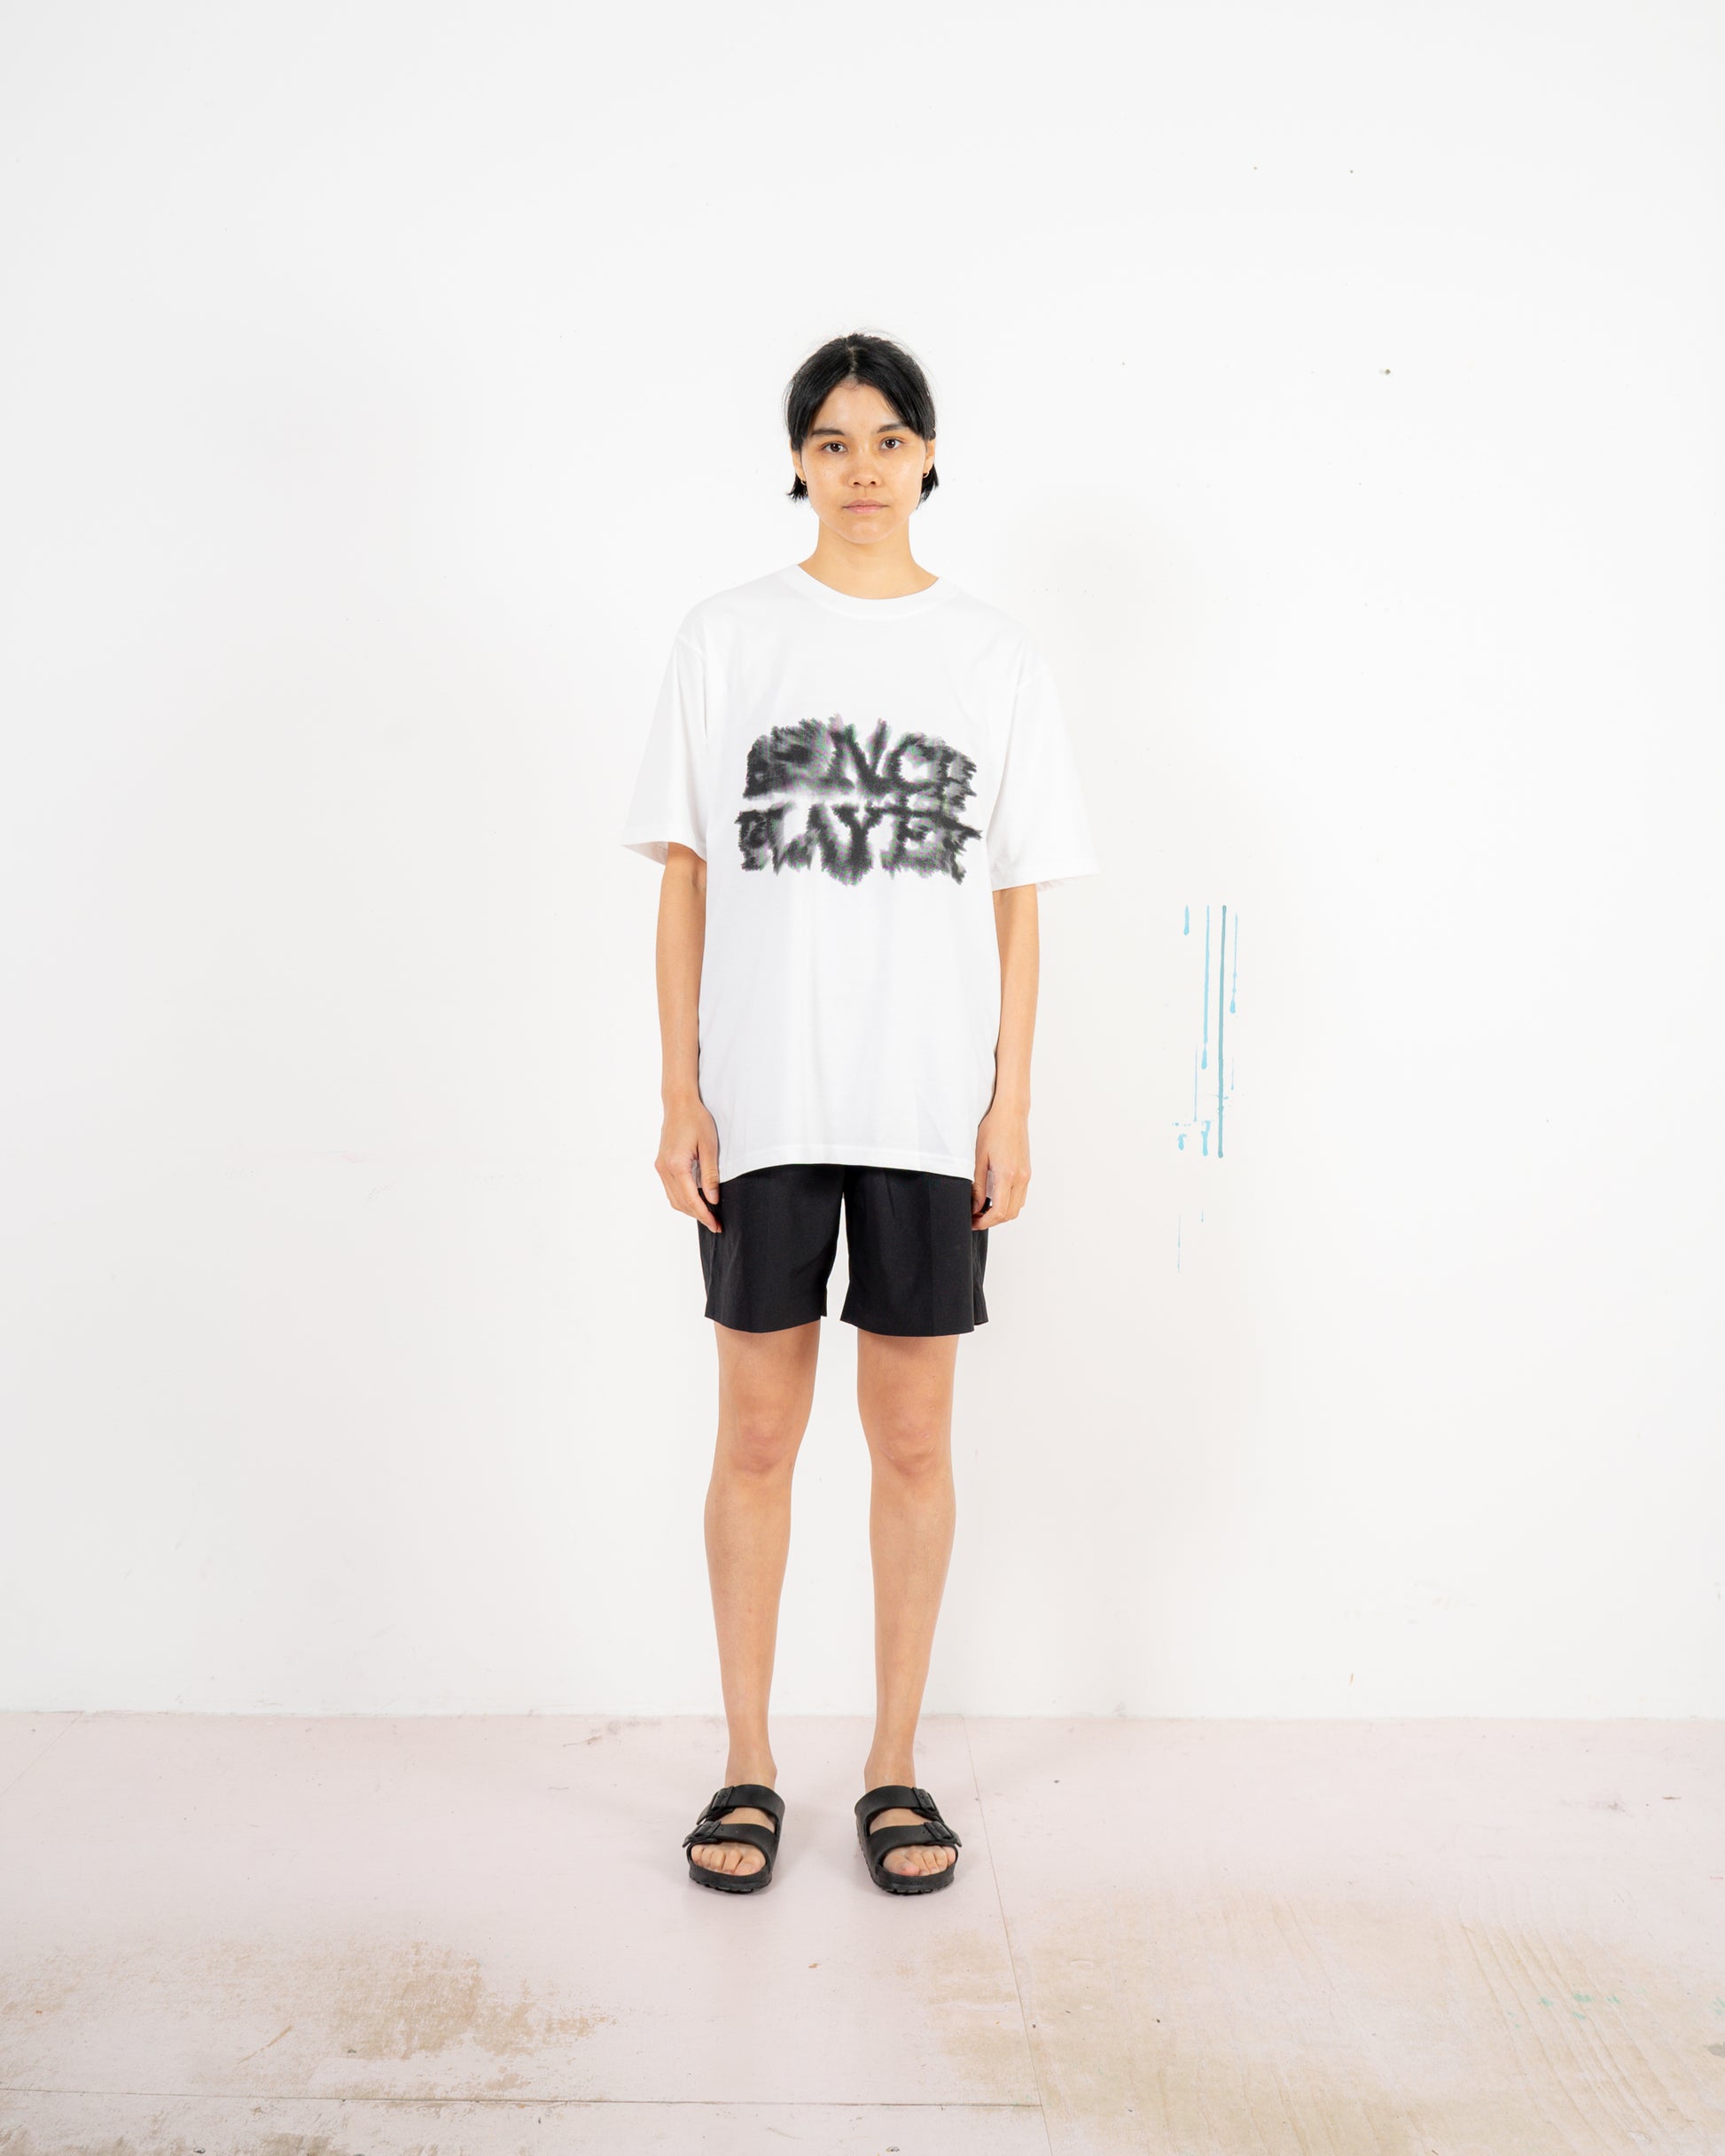 Bench Player Times New Roman T-Shirt by Rop van Mierlo – Wild Animals